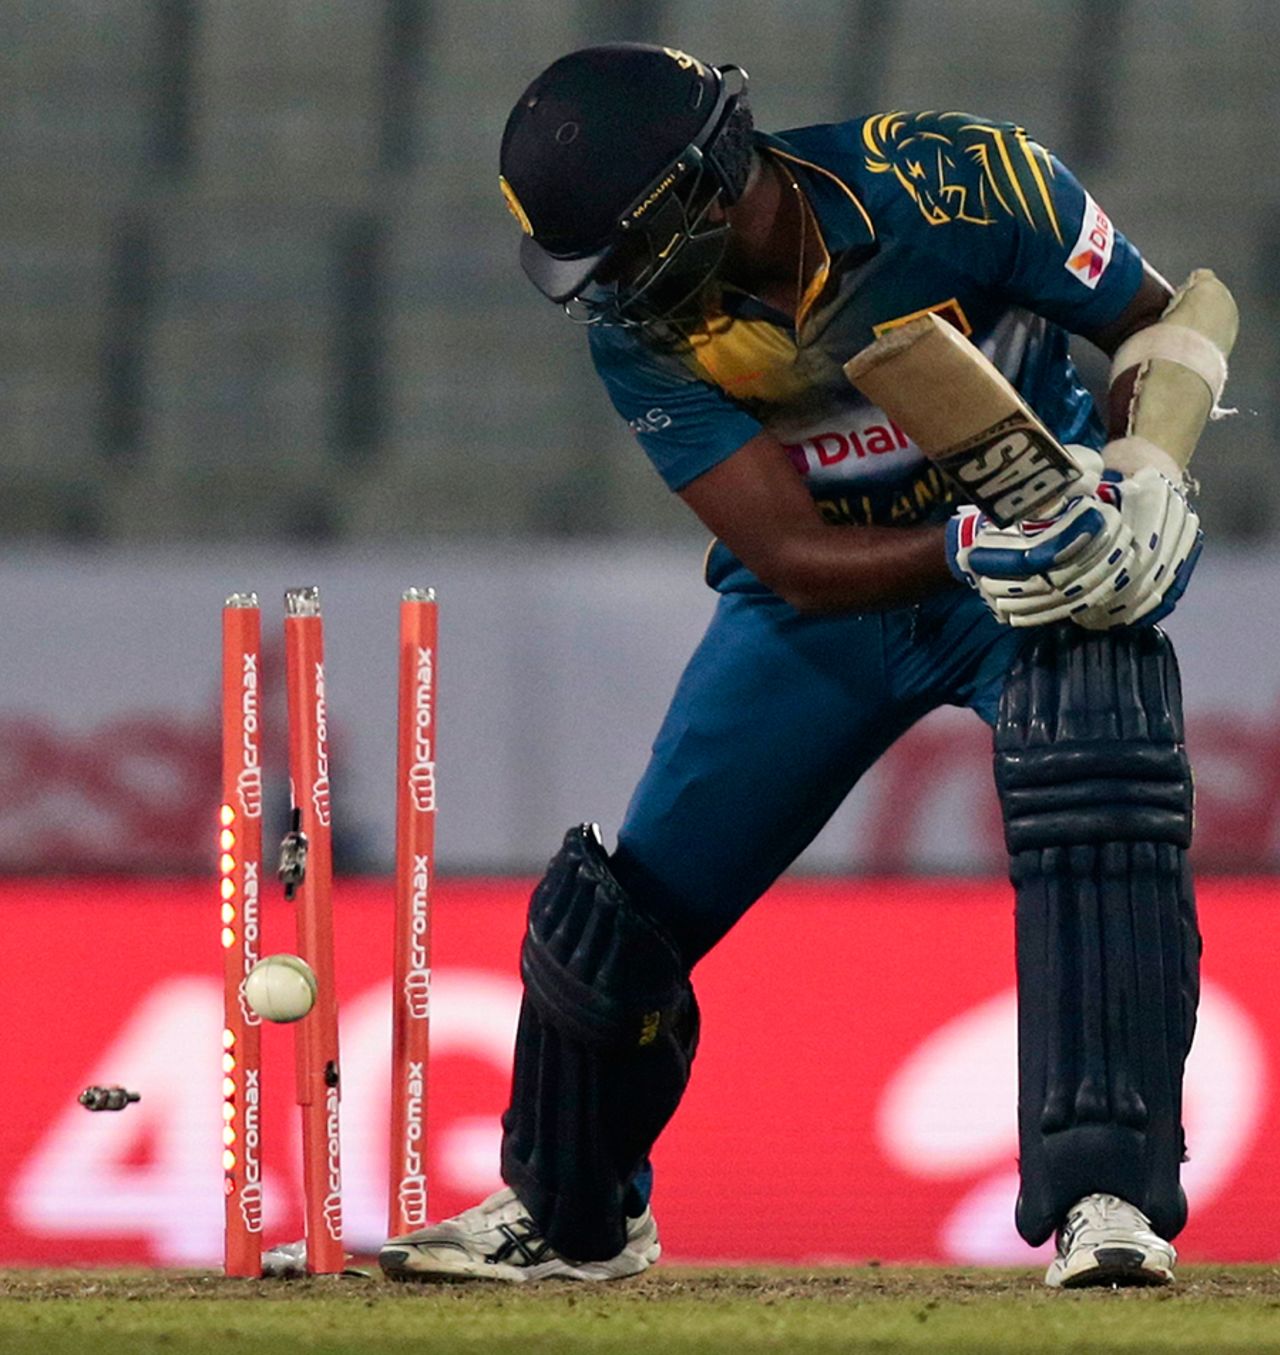 Angelo Mathews was bowled by Hardik Pandya for 18, India v Sri Lanka, Asia Cup 2016, Mirpur, March 1, 2016